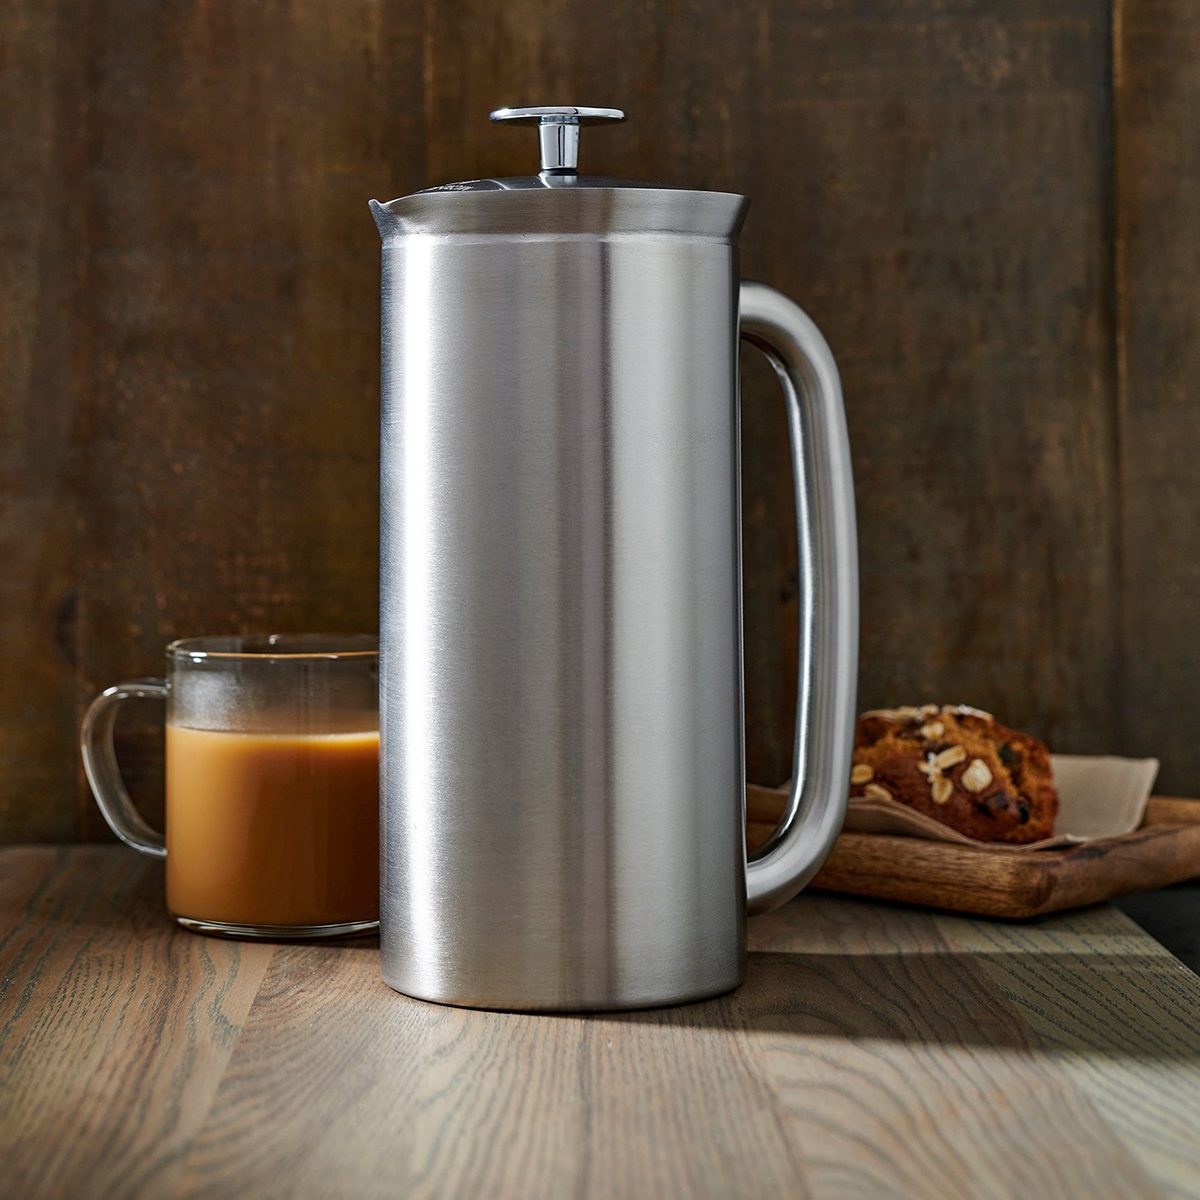 https://www.tasteofhome.com/wp-content/uploads/2023/05/Espro-P7-Stainless-Steel-French-Press_ecomm_via-espro.com_.jpg?fit=700%2C700